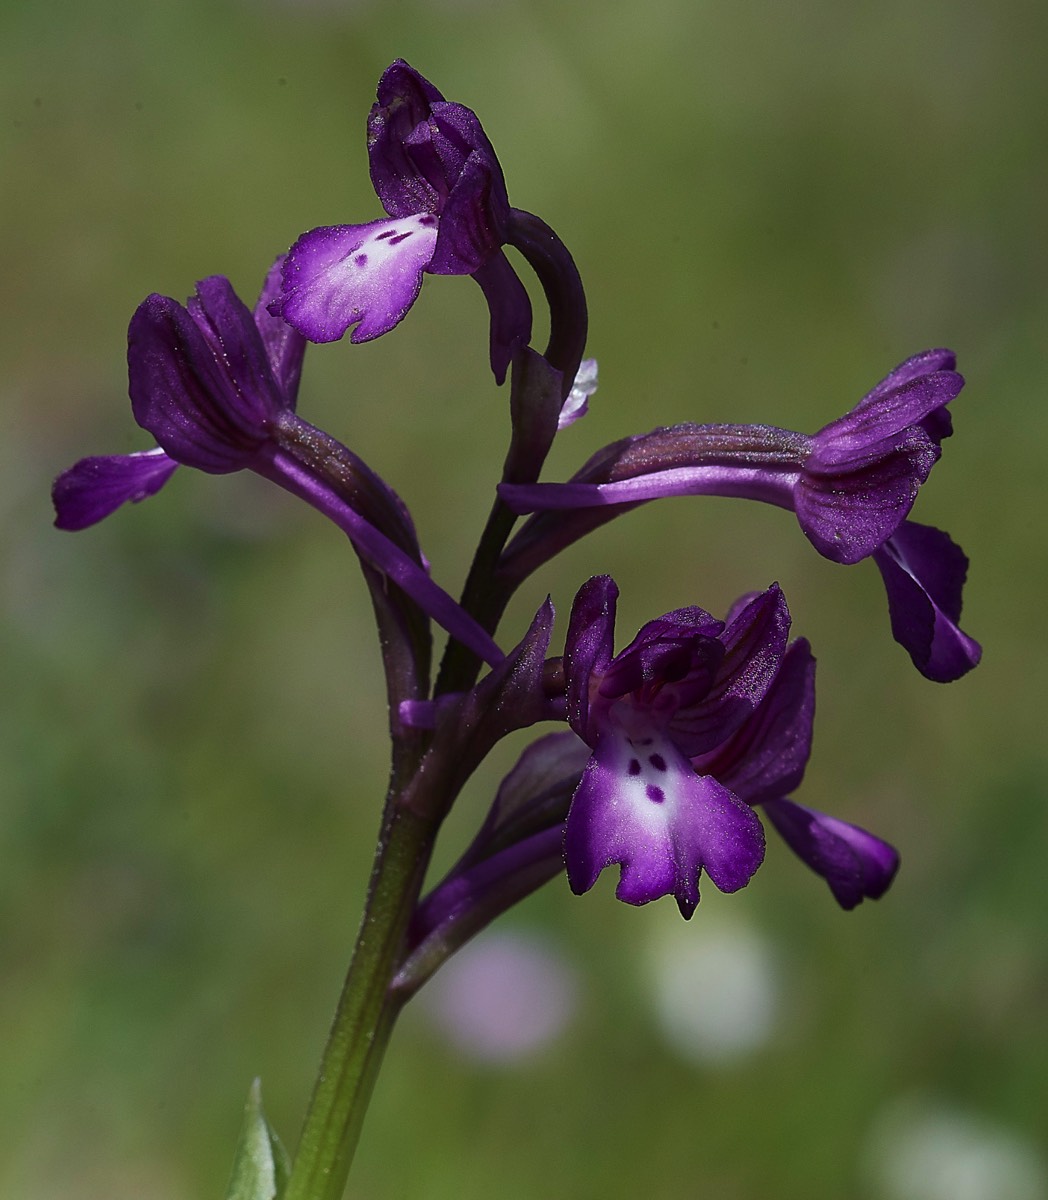 Four Spotted Orchid  Mourne Crete 10/04/19